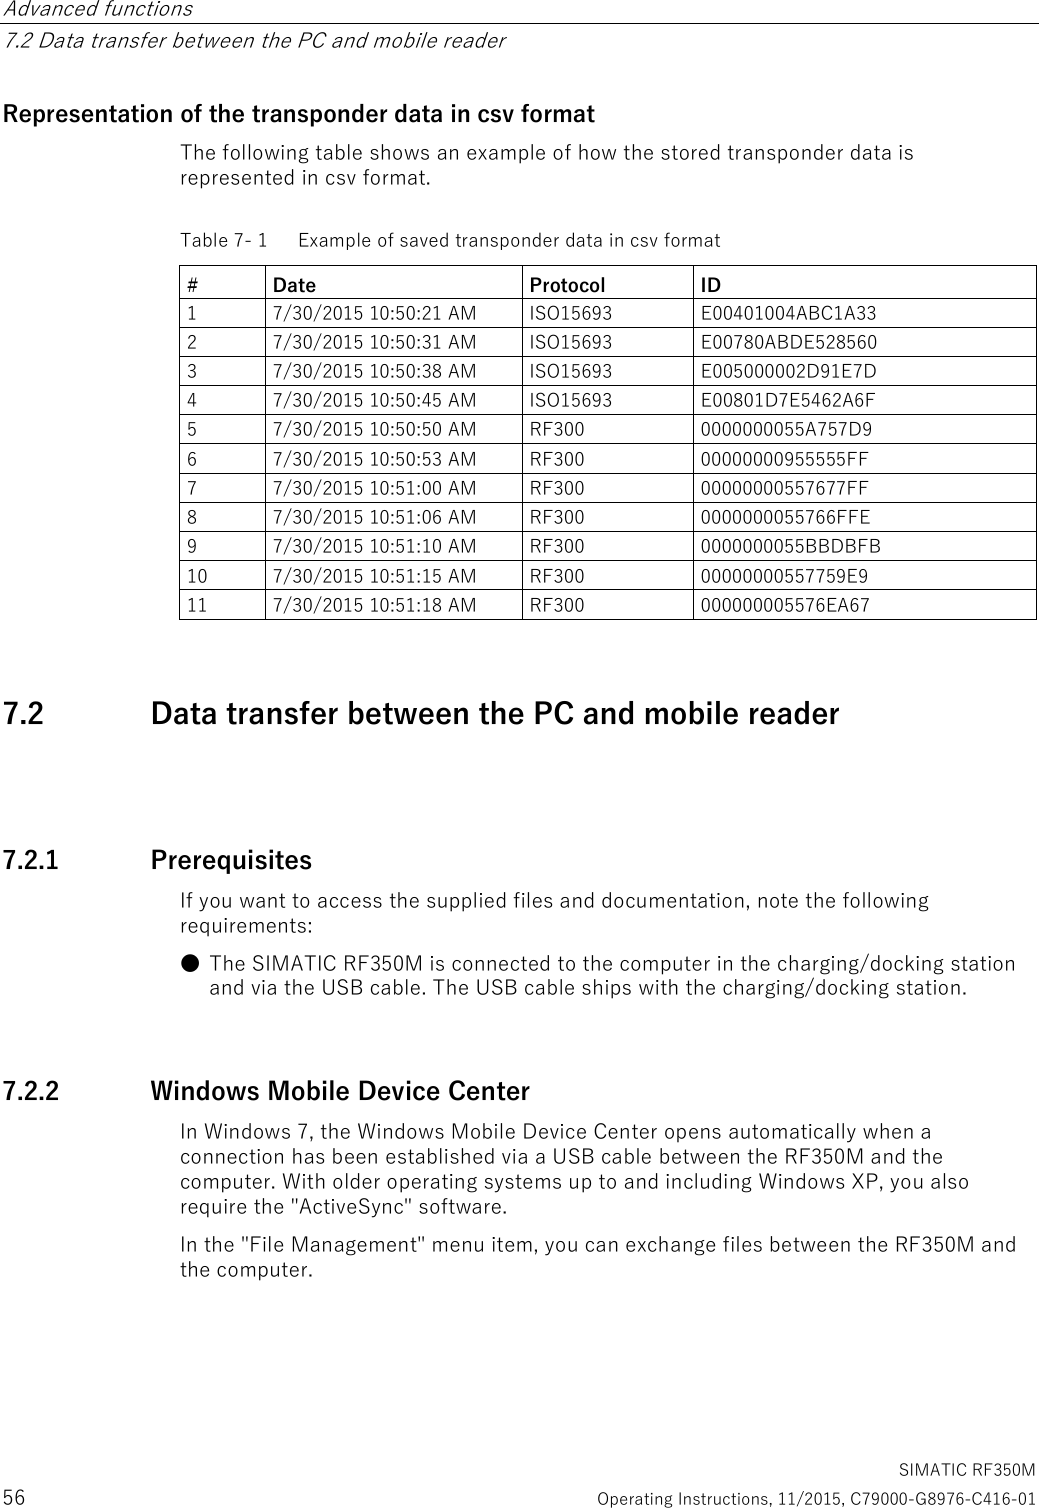 Advanced functions   7.2 Data transfer between the PC and mobile reader   SIMATIC RF350M 56  Operating Instructions, 11/2015, C79000-G8976-C416-01 Representation of the transponder data in csv format The following table shows an example of how the stored transponder data is represented in csv format. Table 7- 1  Example of saved transponder data in csv format  # Date Protocol ID 1  7/30/2015 10:50:21 AM  ISO15693  E00401004ABC1A33 2  7/30/2015 10:50:31 AM  ISO15693  E00780ABDE528560 3  7/30/2015 10:50:38 AM  ISO15693  E005000002D91E7D 4  7/30/2015 10:50:45 AM  ISO15693  E00801D7E5462A6F 5  7/30/2015 10:50:50 AM  RF300  0000000055A757D9 6  7/30/2015 10:50:53 AM  RF300  00000000955555FF 7  7/30/2015 10:51:00 AM  RF300  00000000557677FF 8  7/30/2015 10:51:06 AM  RF300  0000000055766FFE 9  7/30/2015 10:51:10 AM  RF300  0000000055BBDBFB 10  7/30/2015 10:51:15 AM  RF300  00000000557759E9 11  7/30/2015 10:51:18 AM  RF300  000000005576EA67 7.2 Data transfer between the PC and mobile reader  7.2.1 Prerequisites If you want to access the supplied files and documentation, note the following requirements:  ● The SIMATIC RF350M is connected to the computer in the charging/docking station and via the USB cable. The USB cable ships with the charging/docking station. 7.2.2 Windows Mobile Device Center In Windows 7, the Windows Mobile Device Center opens automatically when a connection has been established via a USB cable between the RF350M and the computer. With older operating systems up to and including Windows XP, you also require the &quot;ActiveSync&quot; software. In the &quot;File Management&quot; menu item, you can exchange files between the RF350M and the computer. 